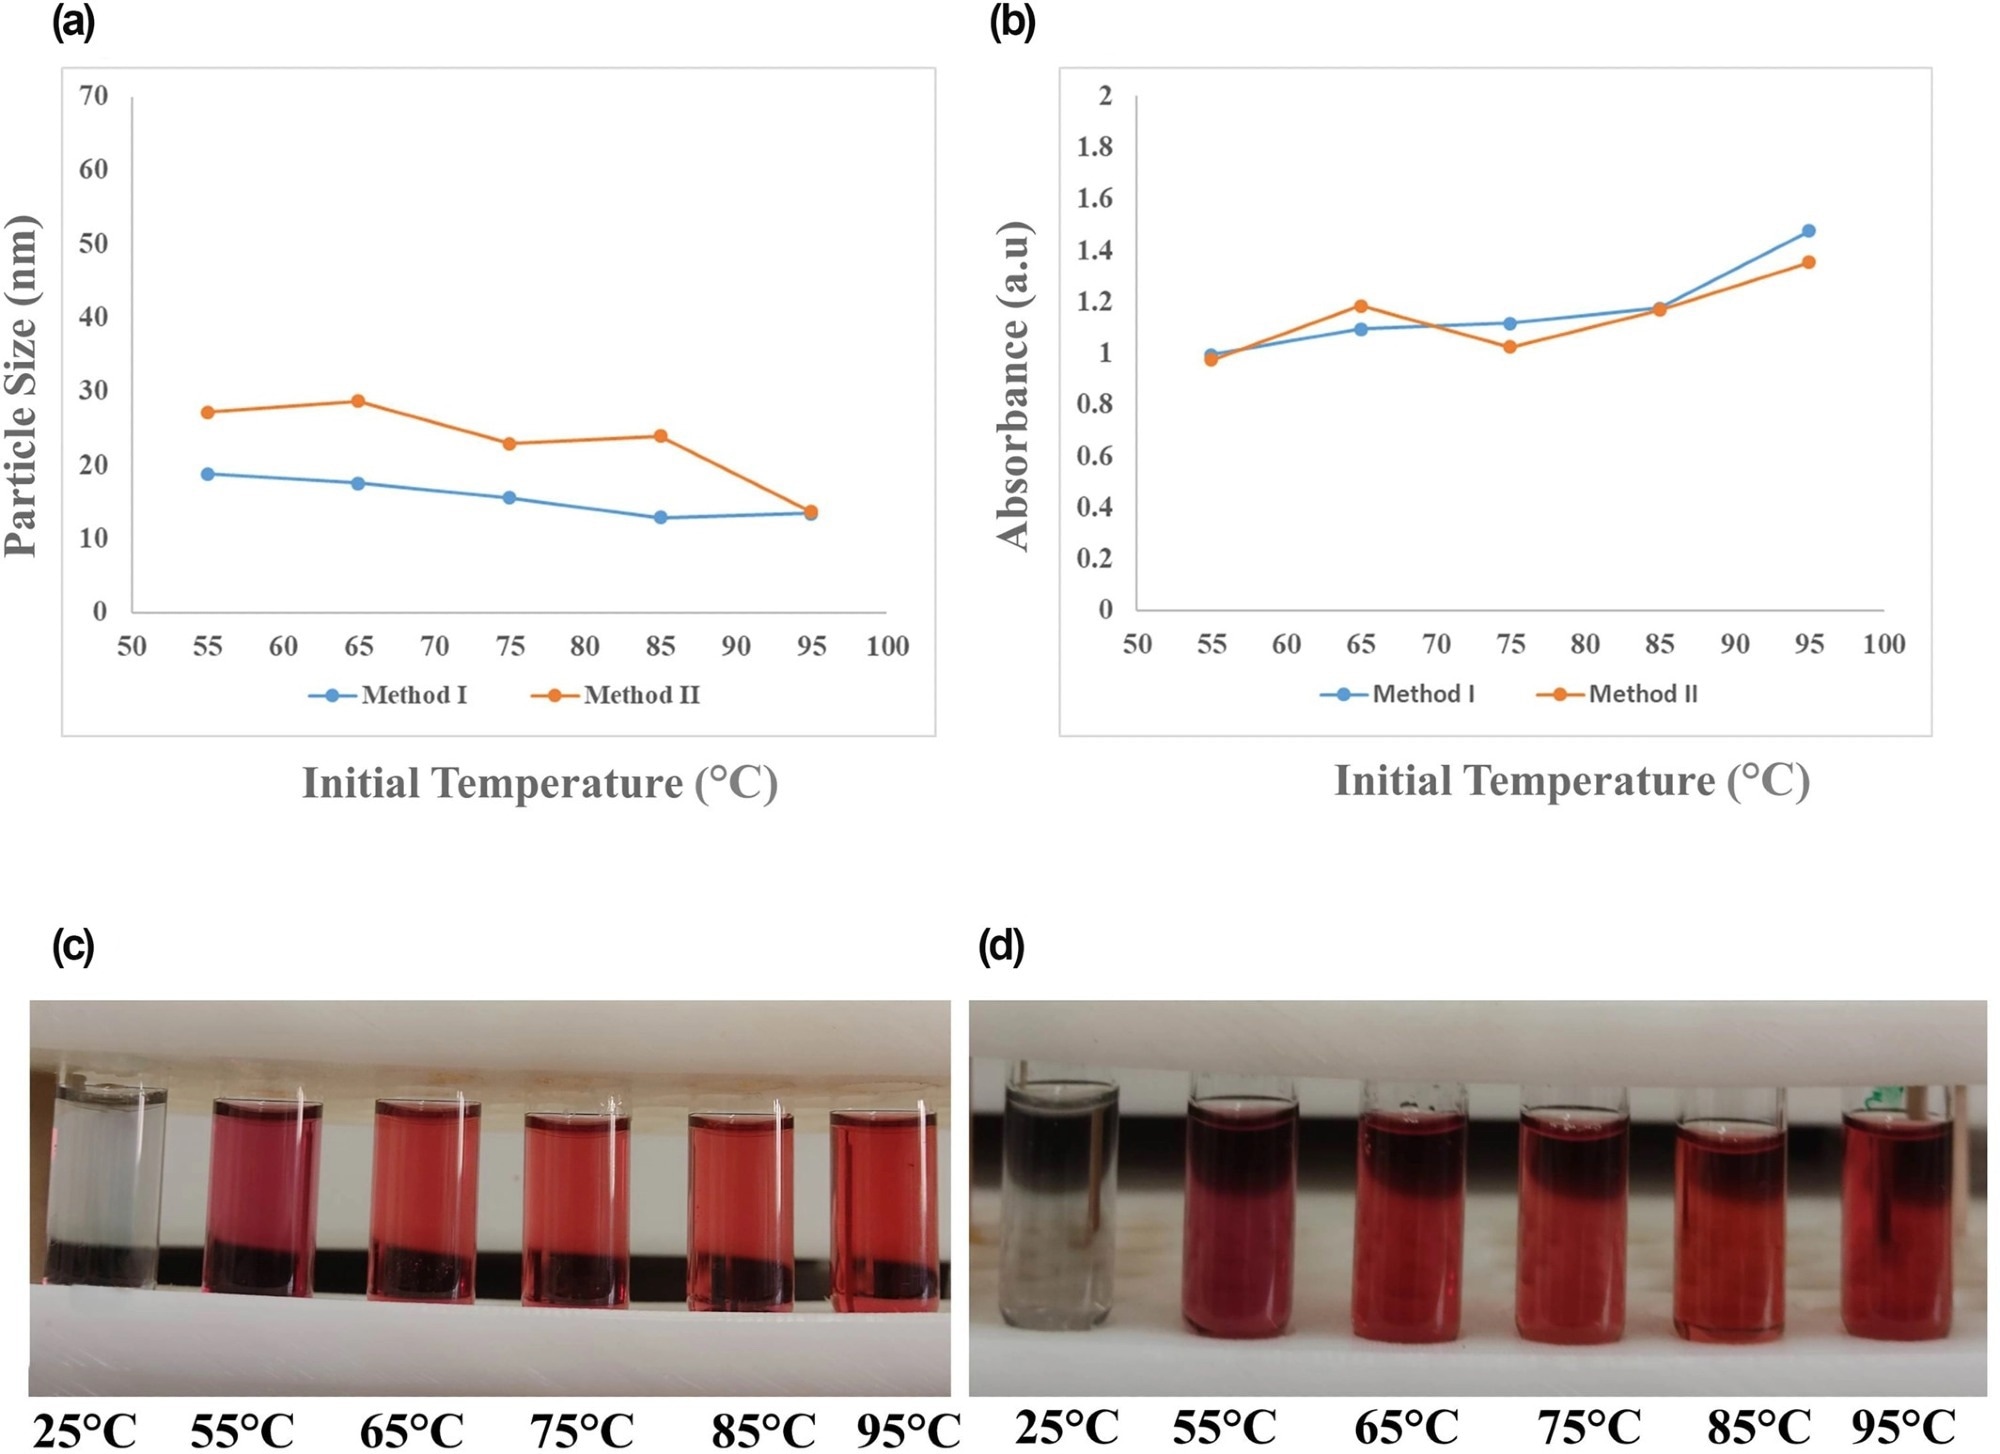 Effect of initial reaction temperature of 25, 55, 65, 75, 85, and 95°C on (a) final particle size and (b) maximum SPR absorption of gold nanoparticles (AuNPs) synthesised by two methods, along with the laboratory images of NPs obtained by (c) method I and (d) method II. SPR, surface plasmon resonance